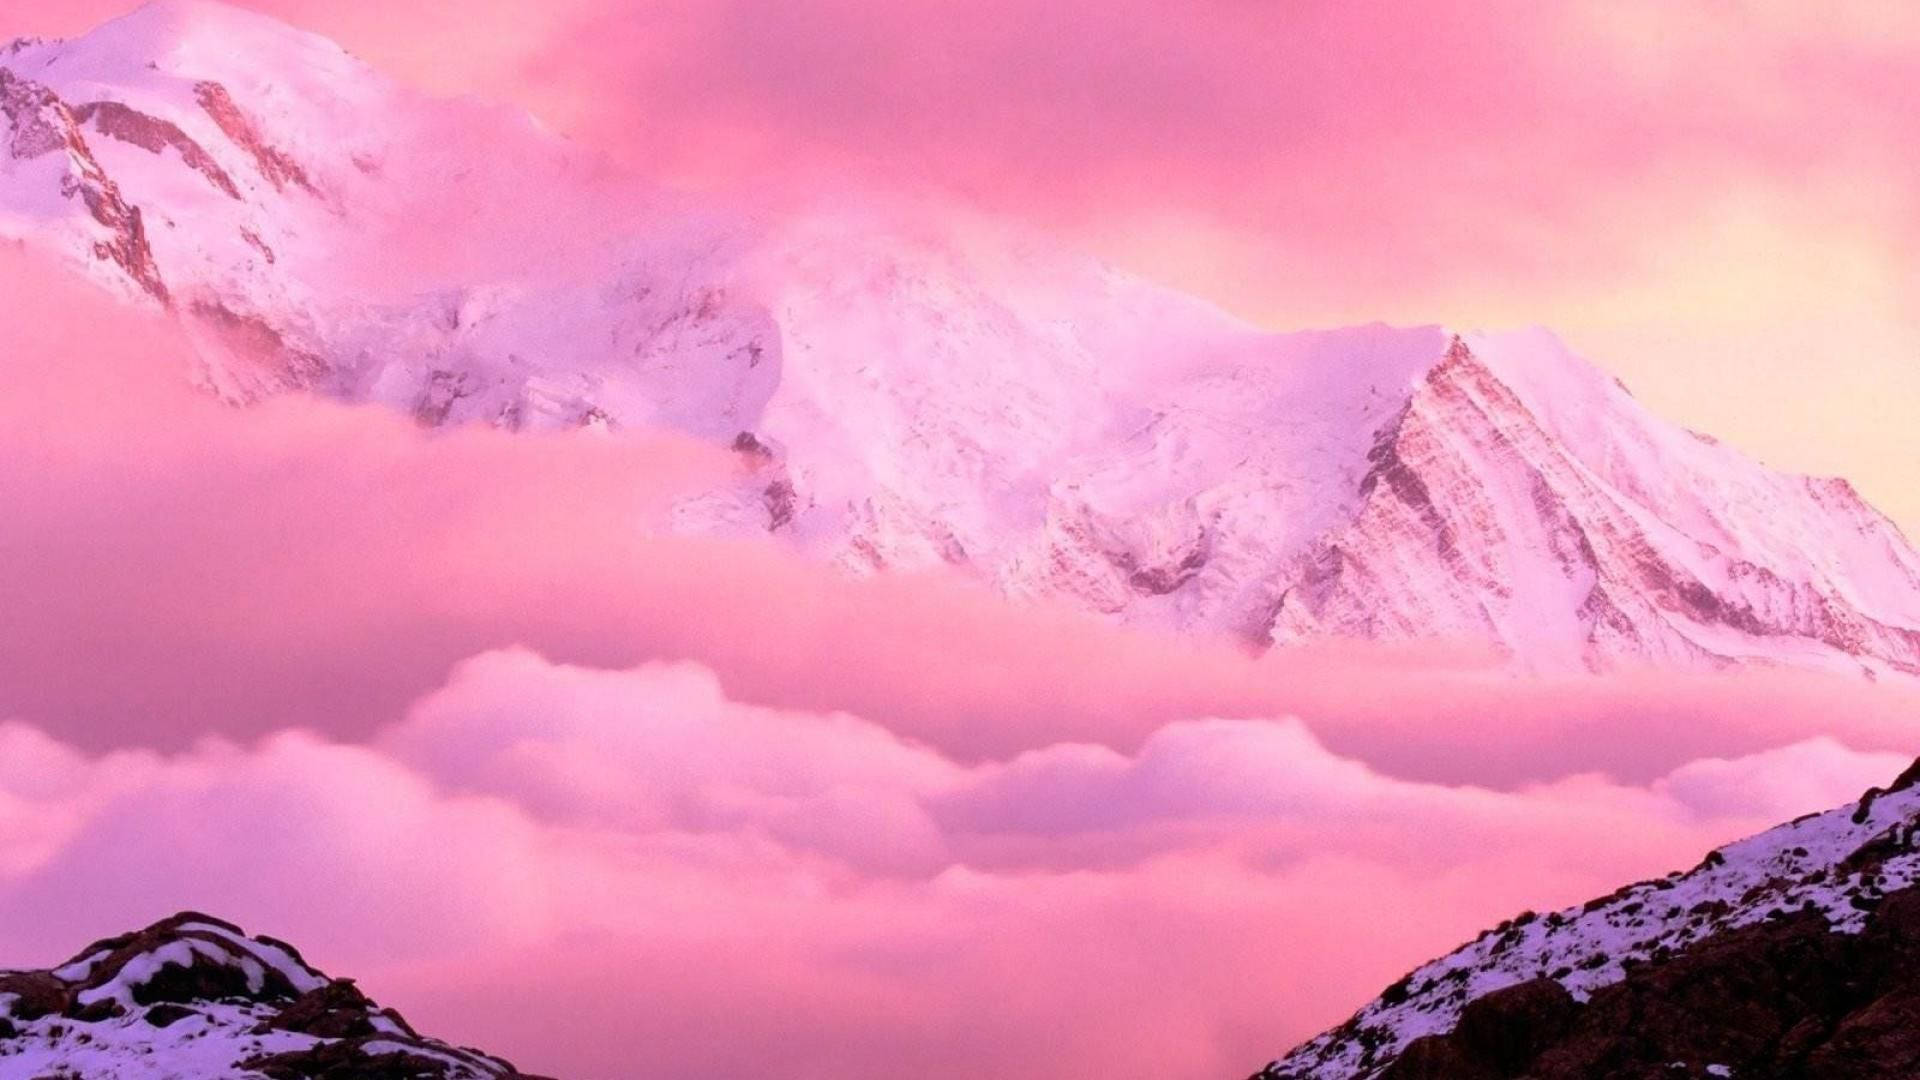 200+] Aesthetic Pink Wallpapers 